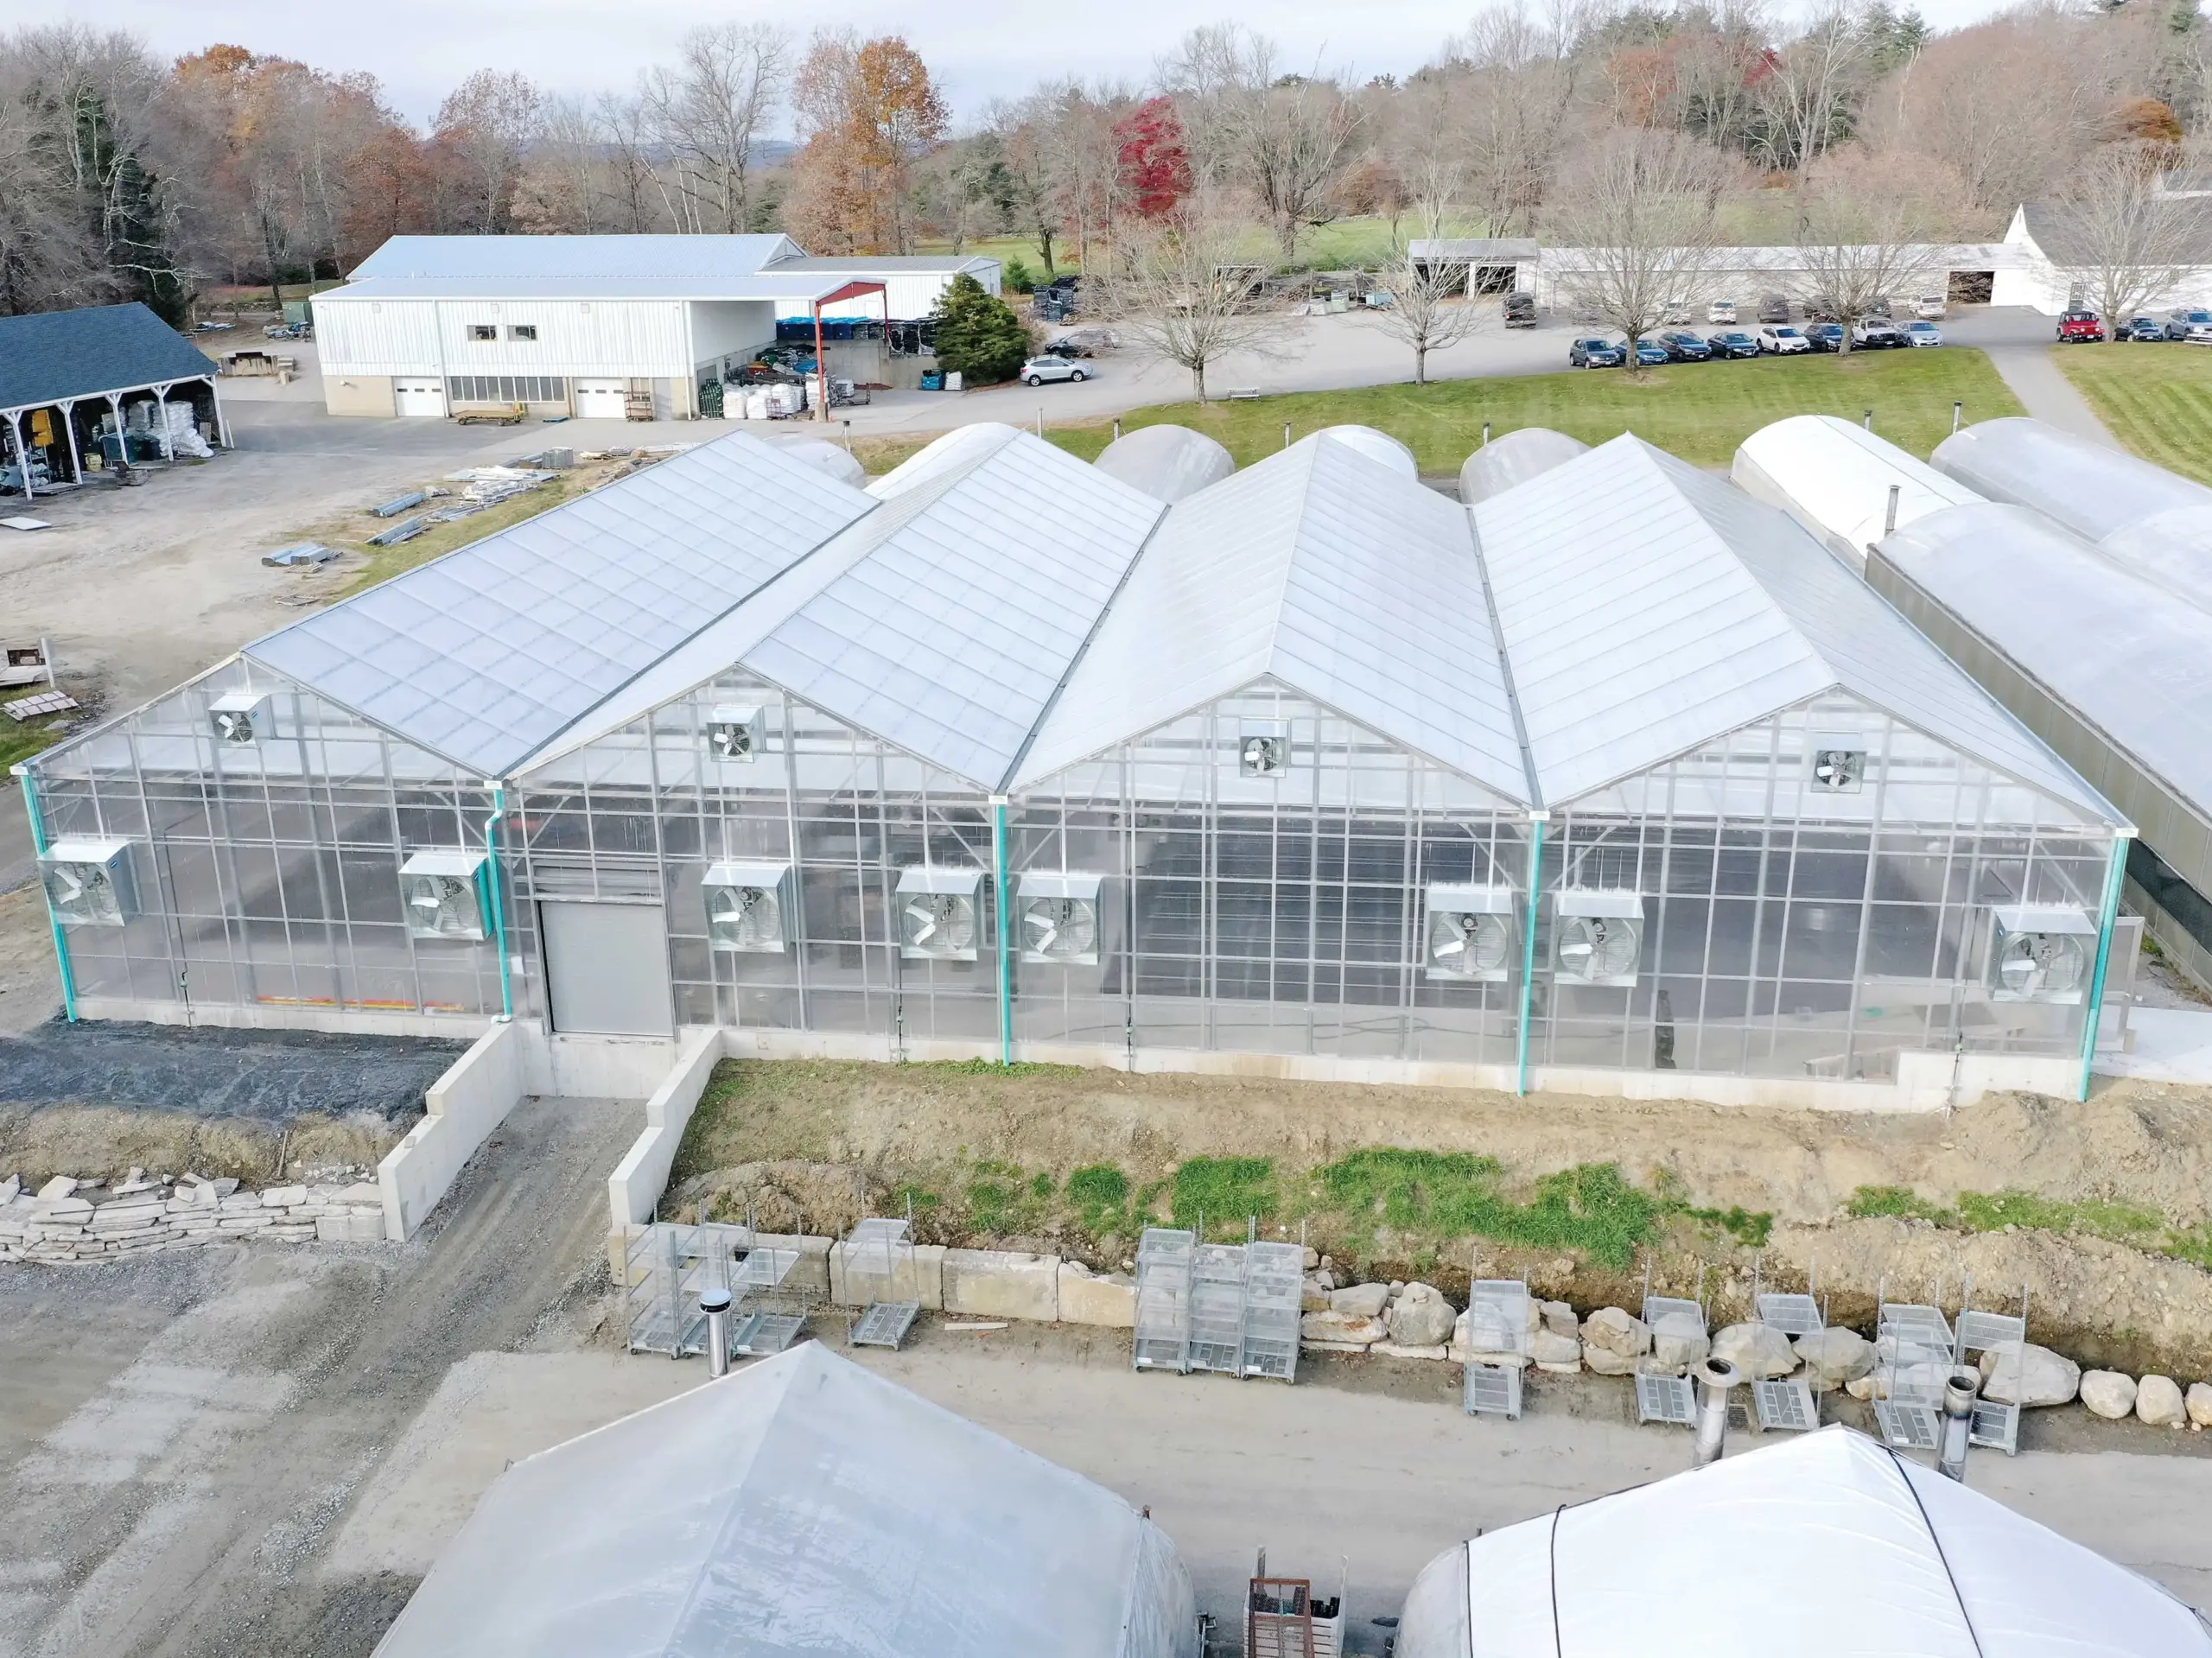 exterior of a gutter-connected greenhouse